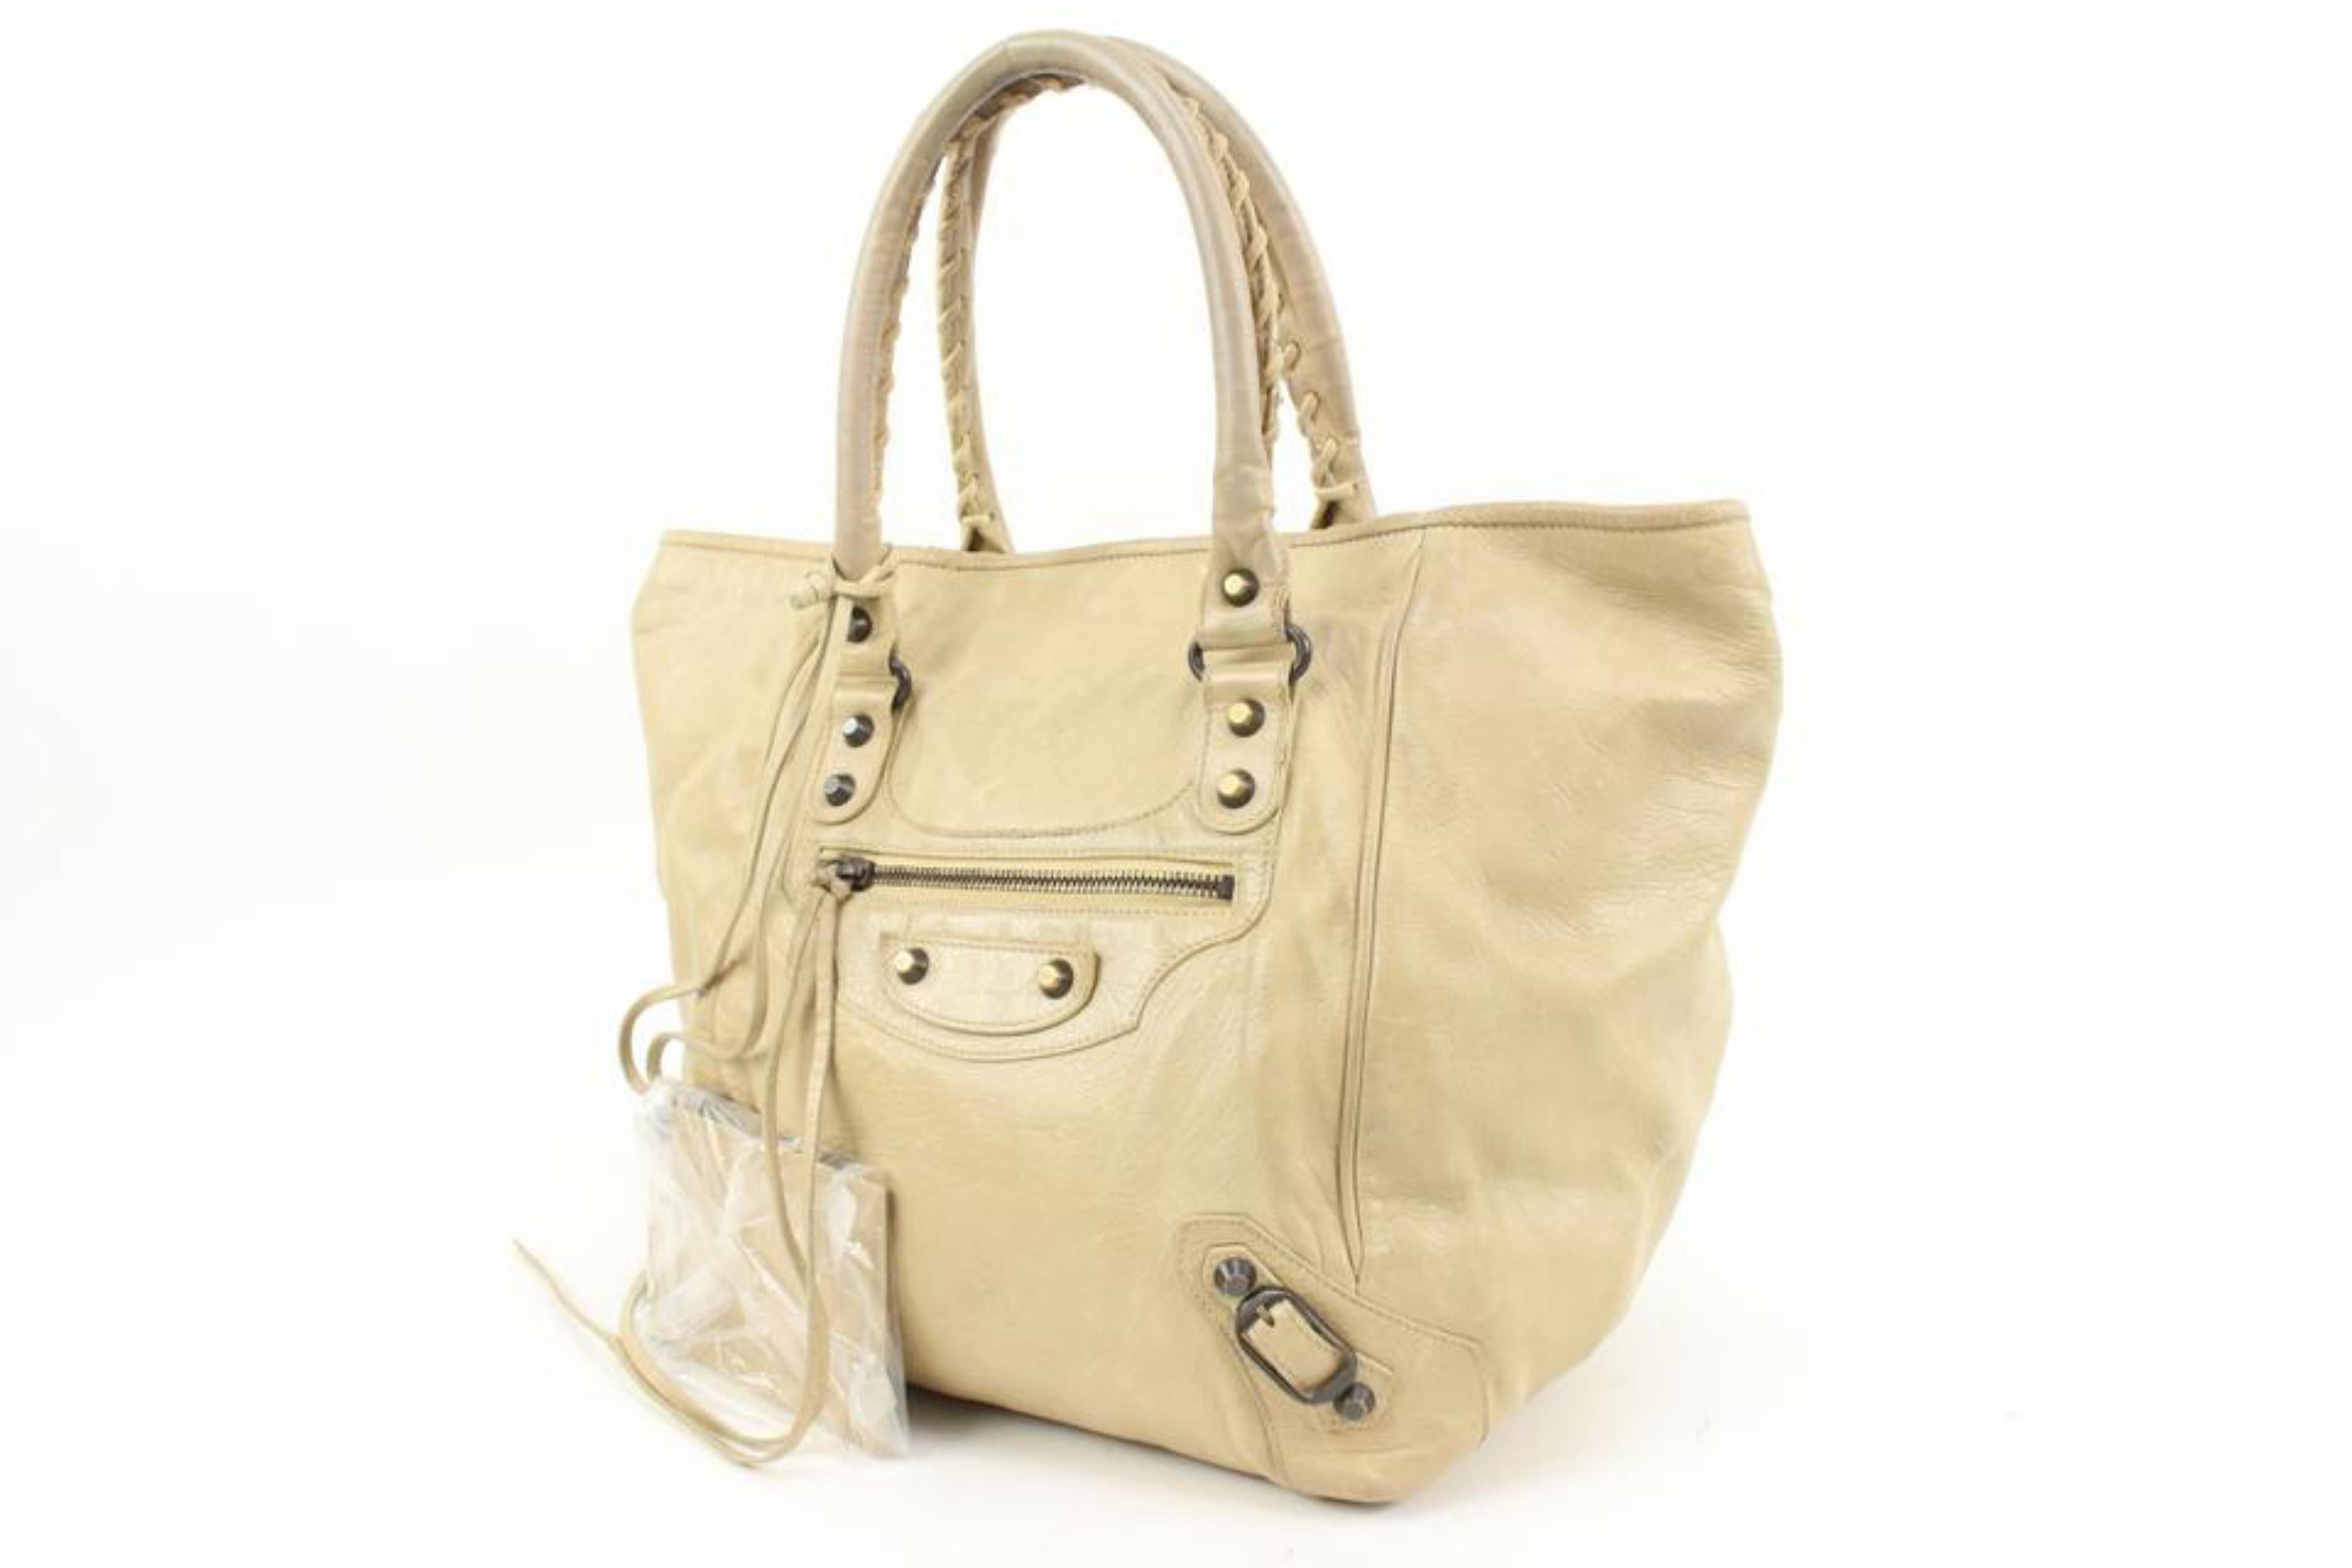 Balenciaga Beige Leather Sunday Tote with Mirror 78ba39s
Date Code/Serial Number: 228750-9678 1669
Made In: Italy
Measurements: Length:  16